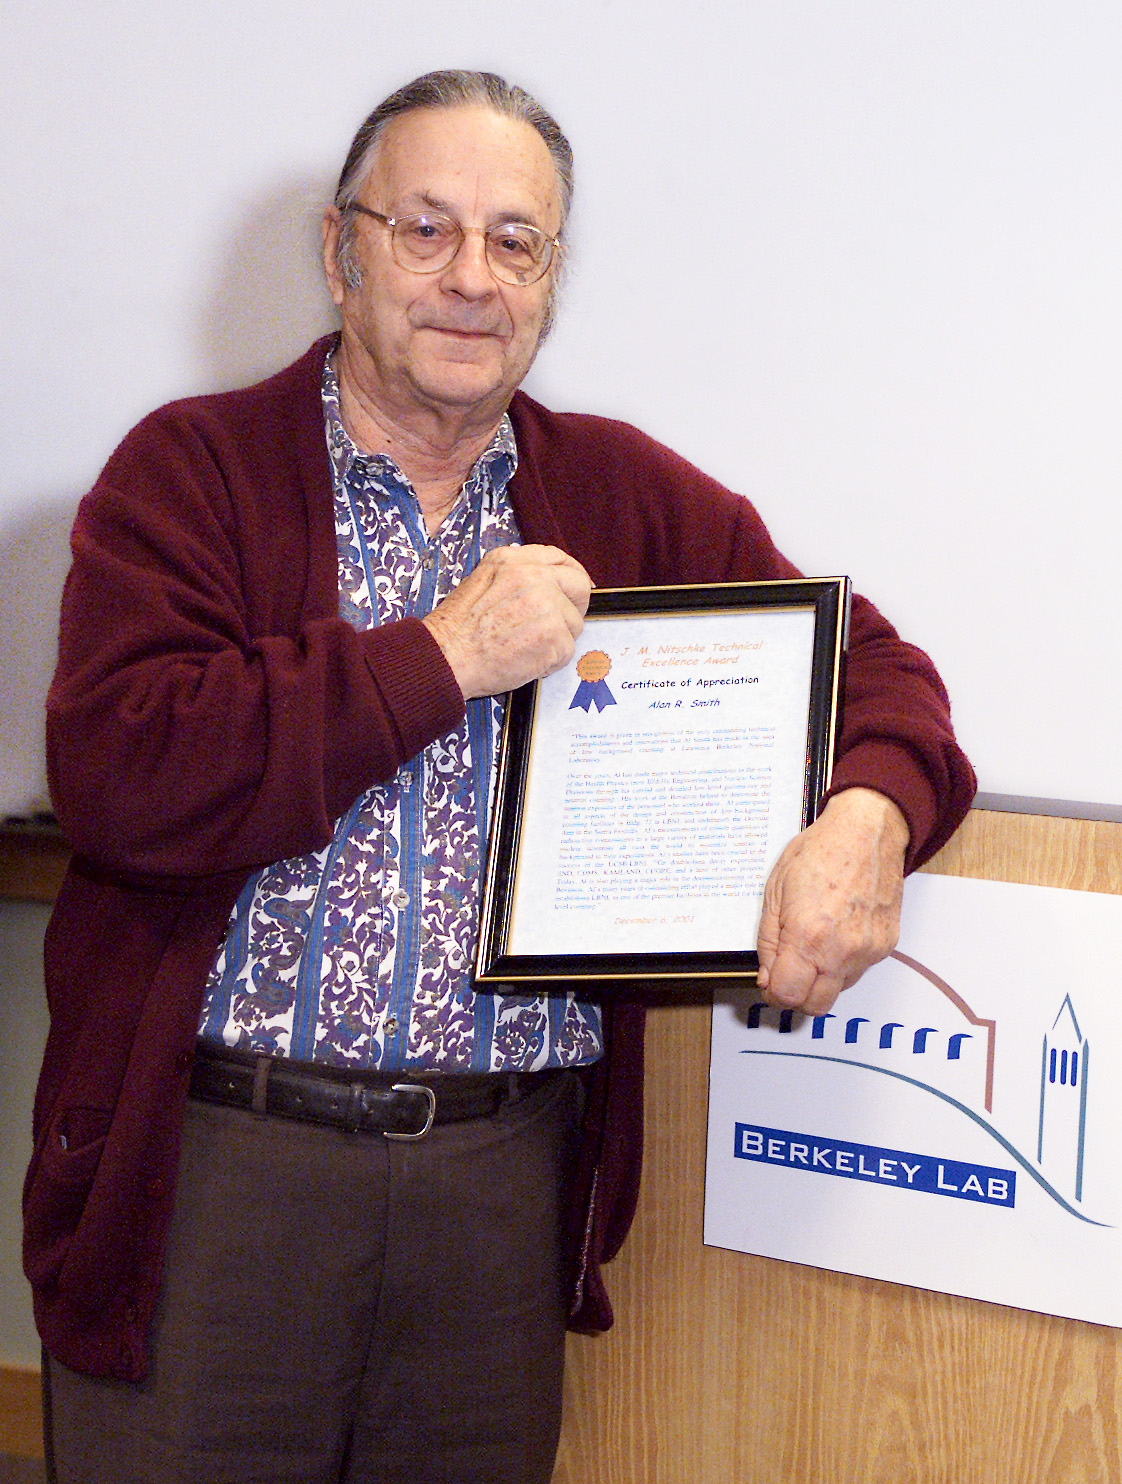 Photo - Smith received the Michael Nitschke Award for Technical Excellence in 2001. (Credit: Berkeley Lab)